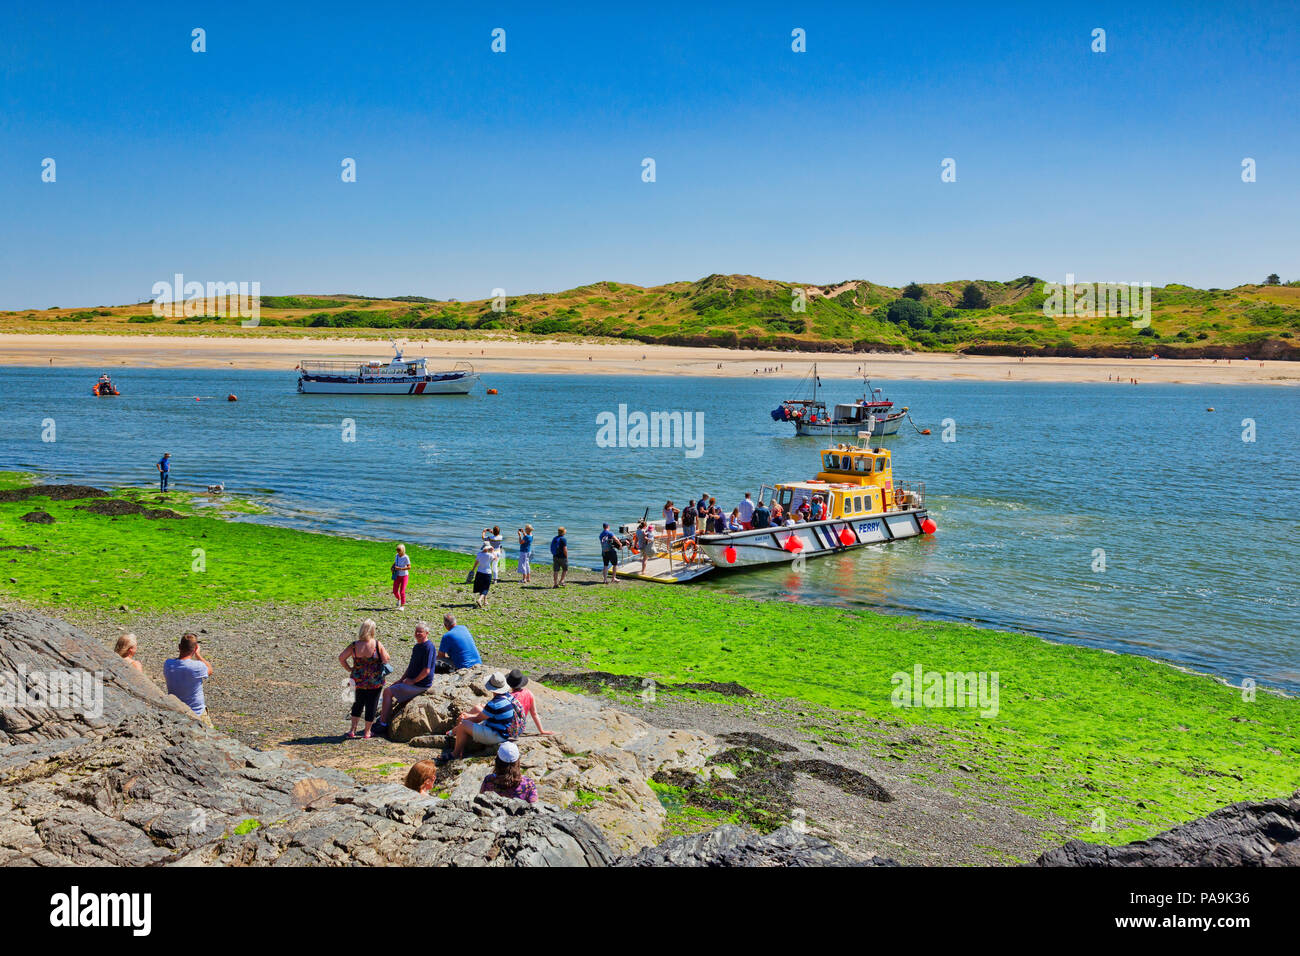 26 June 2018: Padstow, Cornwall UK - Passengers  at the Padstow to Rock Ferry, which crosses the River Camel. Stock Photo